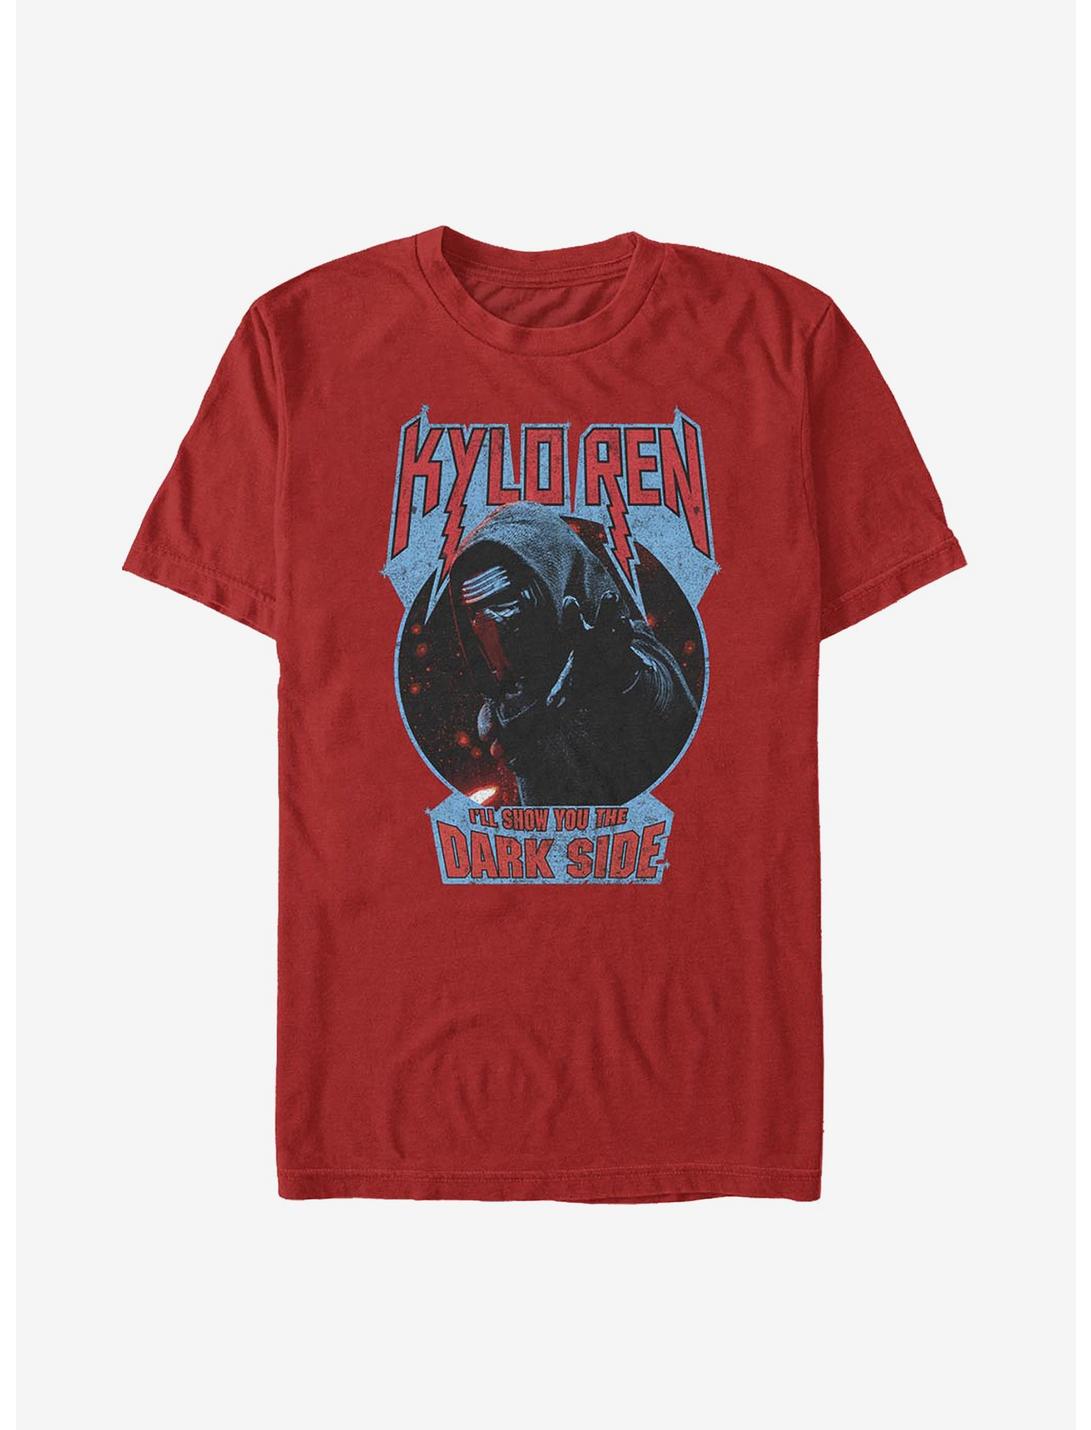 Star Wars: The Force Awakens Kylo Ren Show You The Dark Side T-Shirt, RED, hi-res